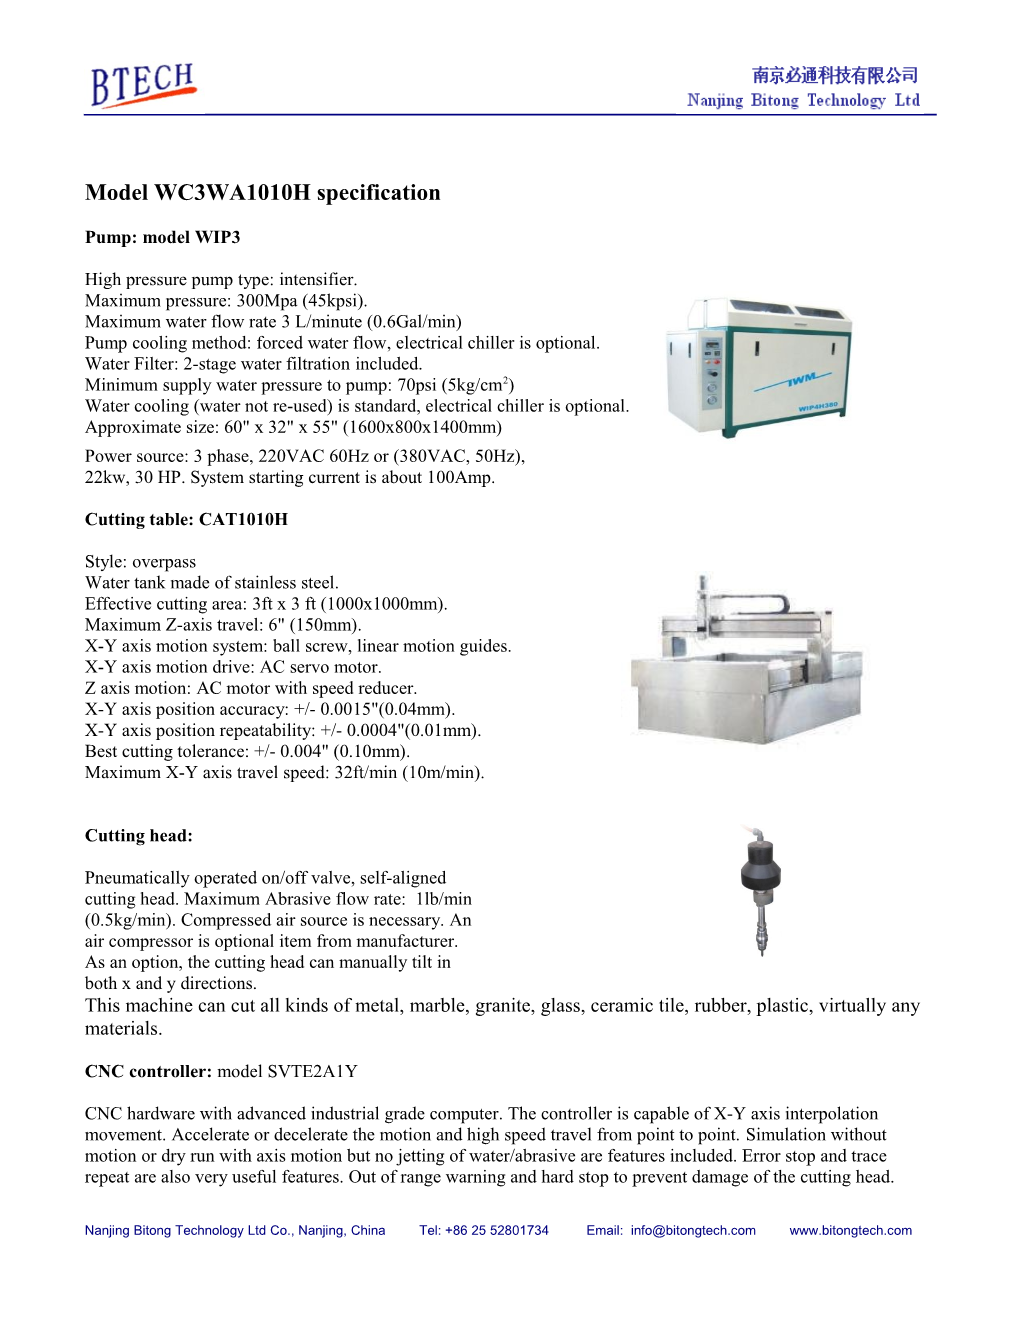 Model WC3WA1010H Specification